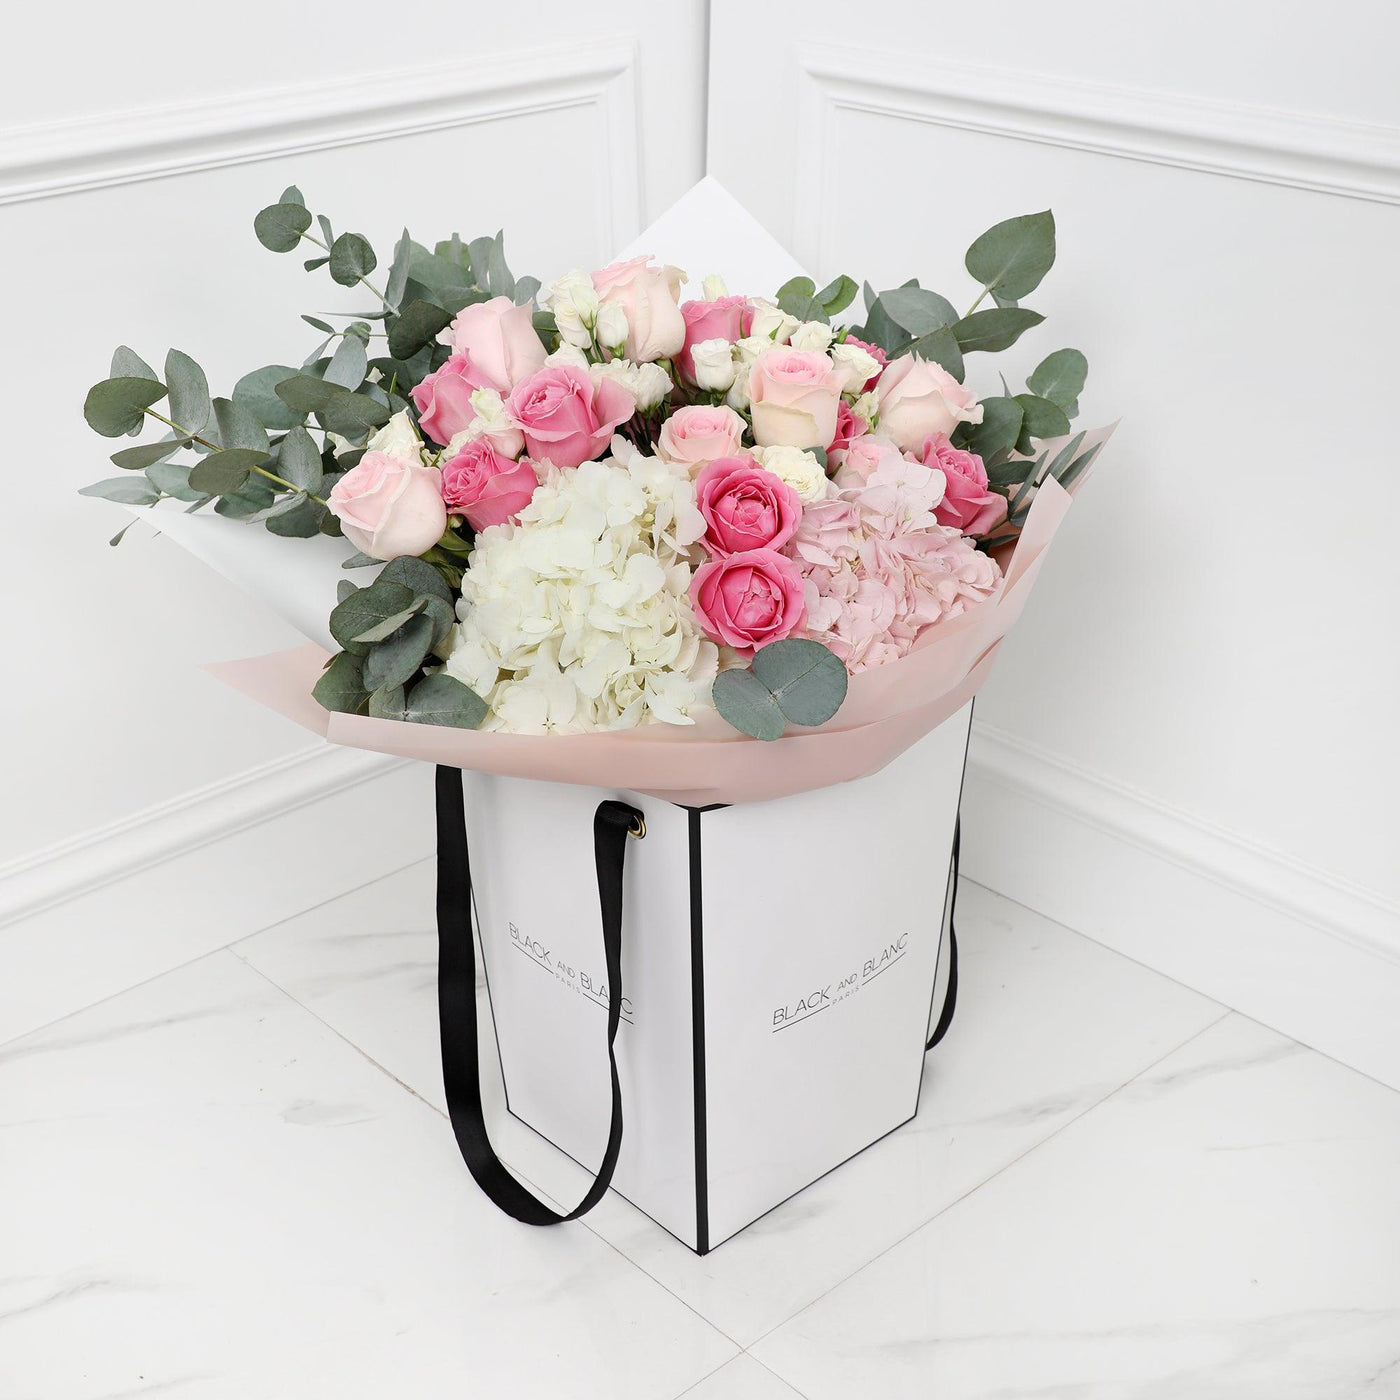 Notre Dame Bouqs - Fresh Flowers - BLACK AND BLANC